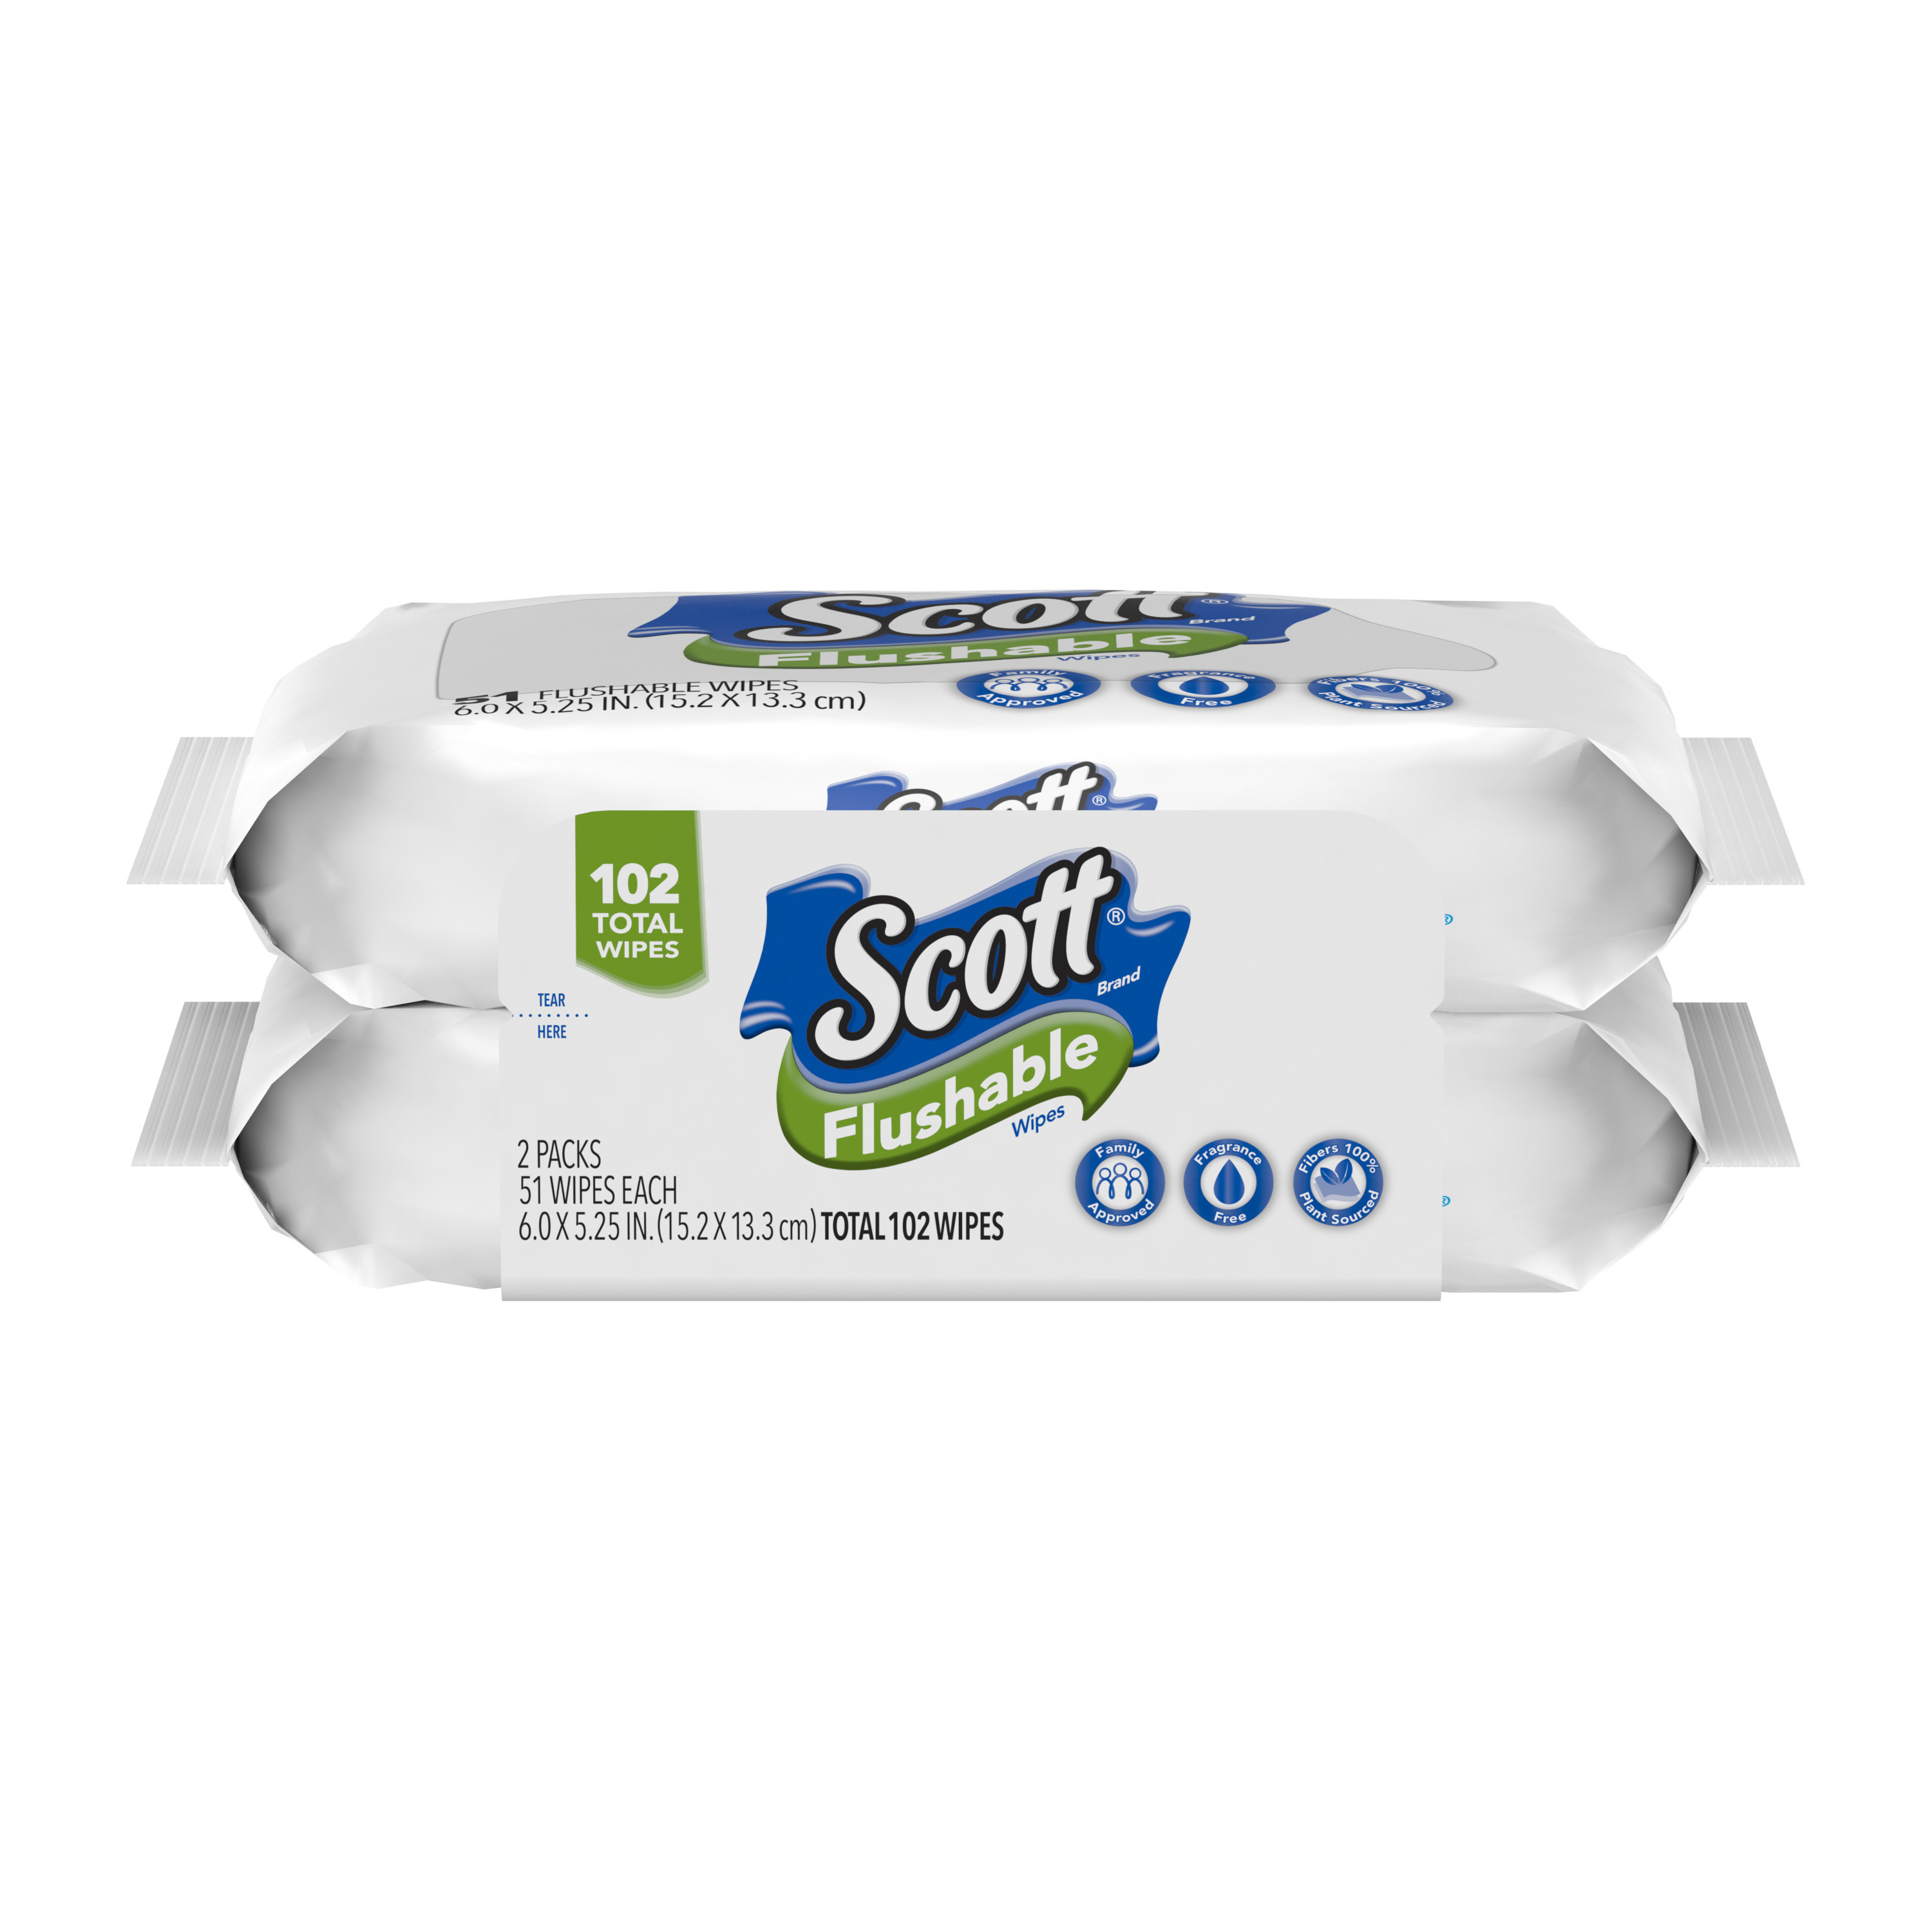 Scott Flushable Wet Wipes, 2 Resealable Packs, 51 Wipes Per Pack (102 Wipes Total) - image 1 of 7